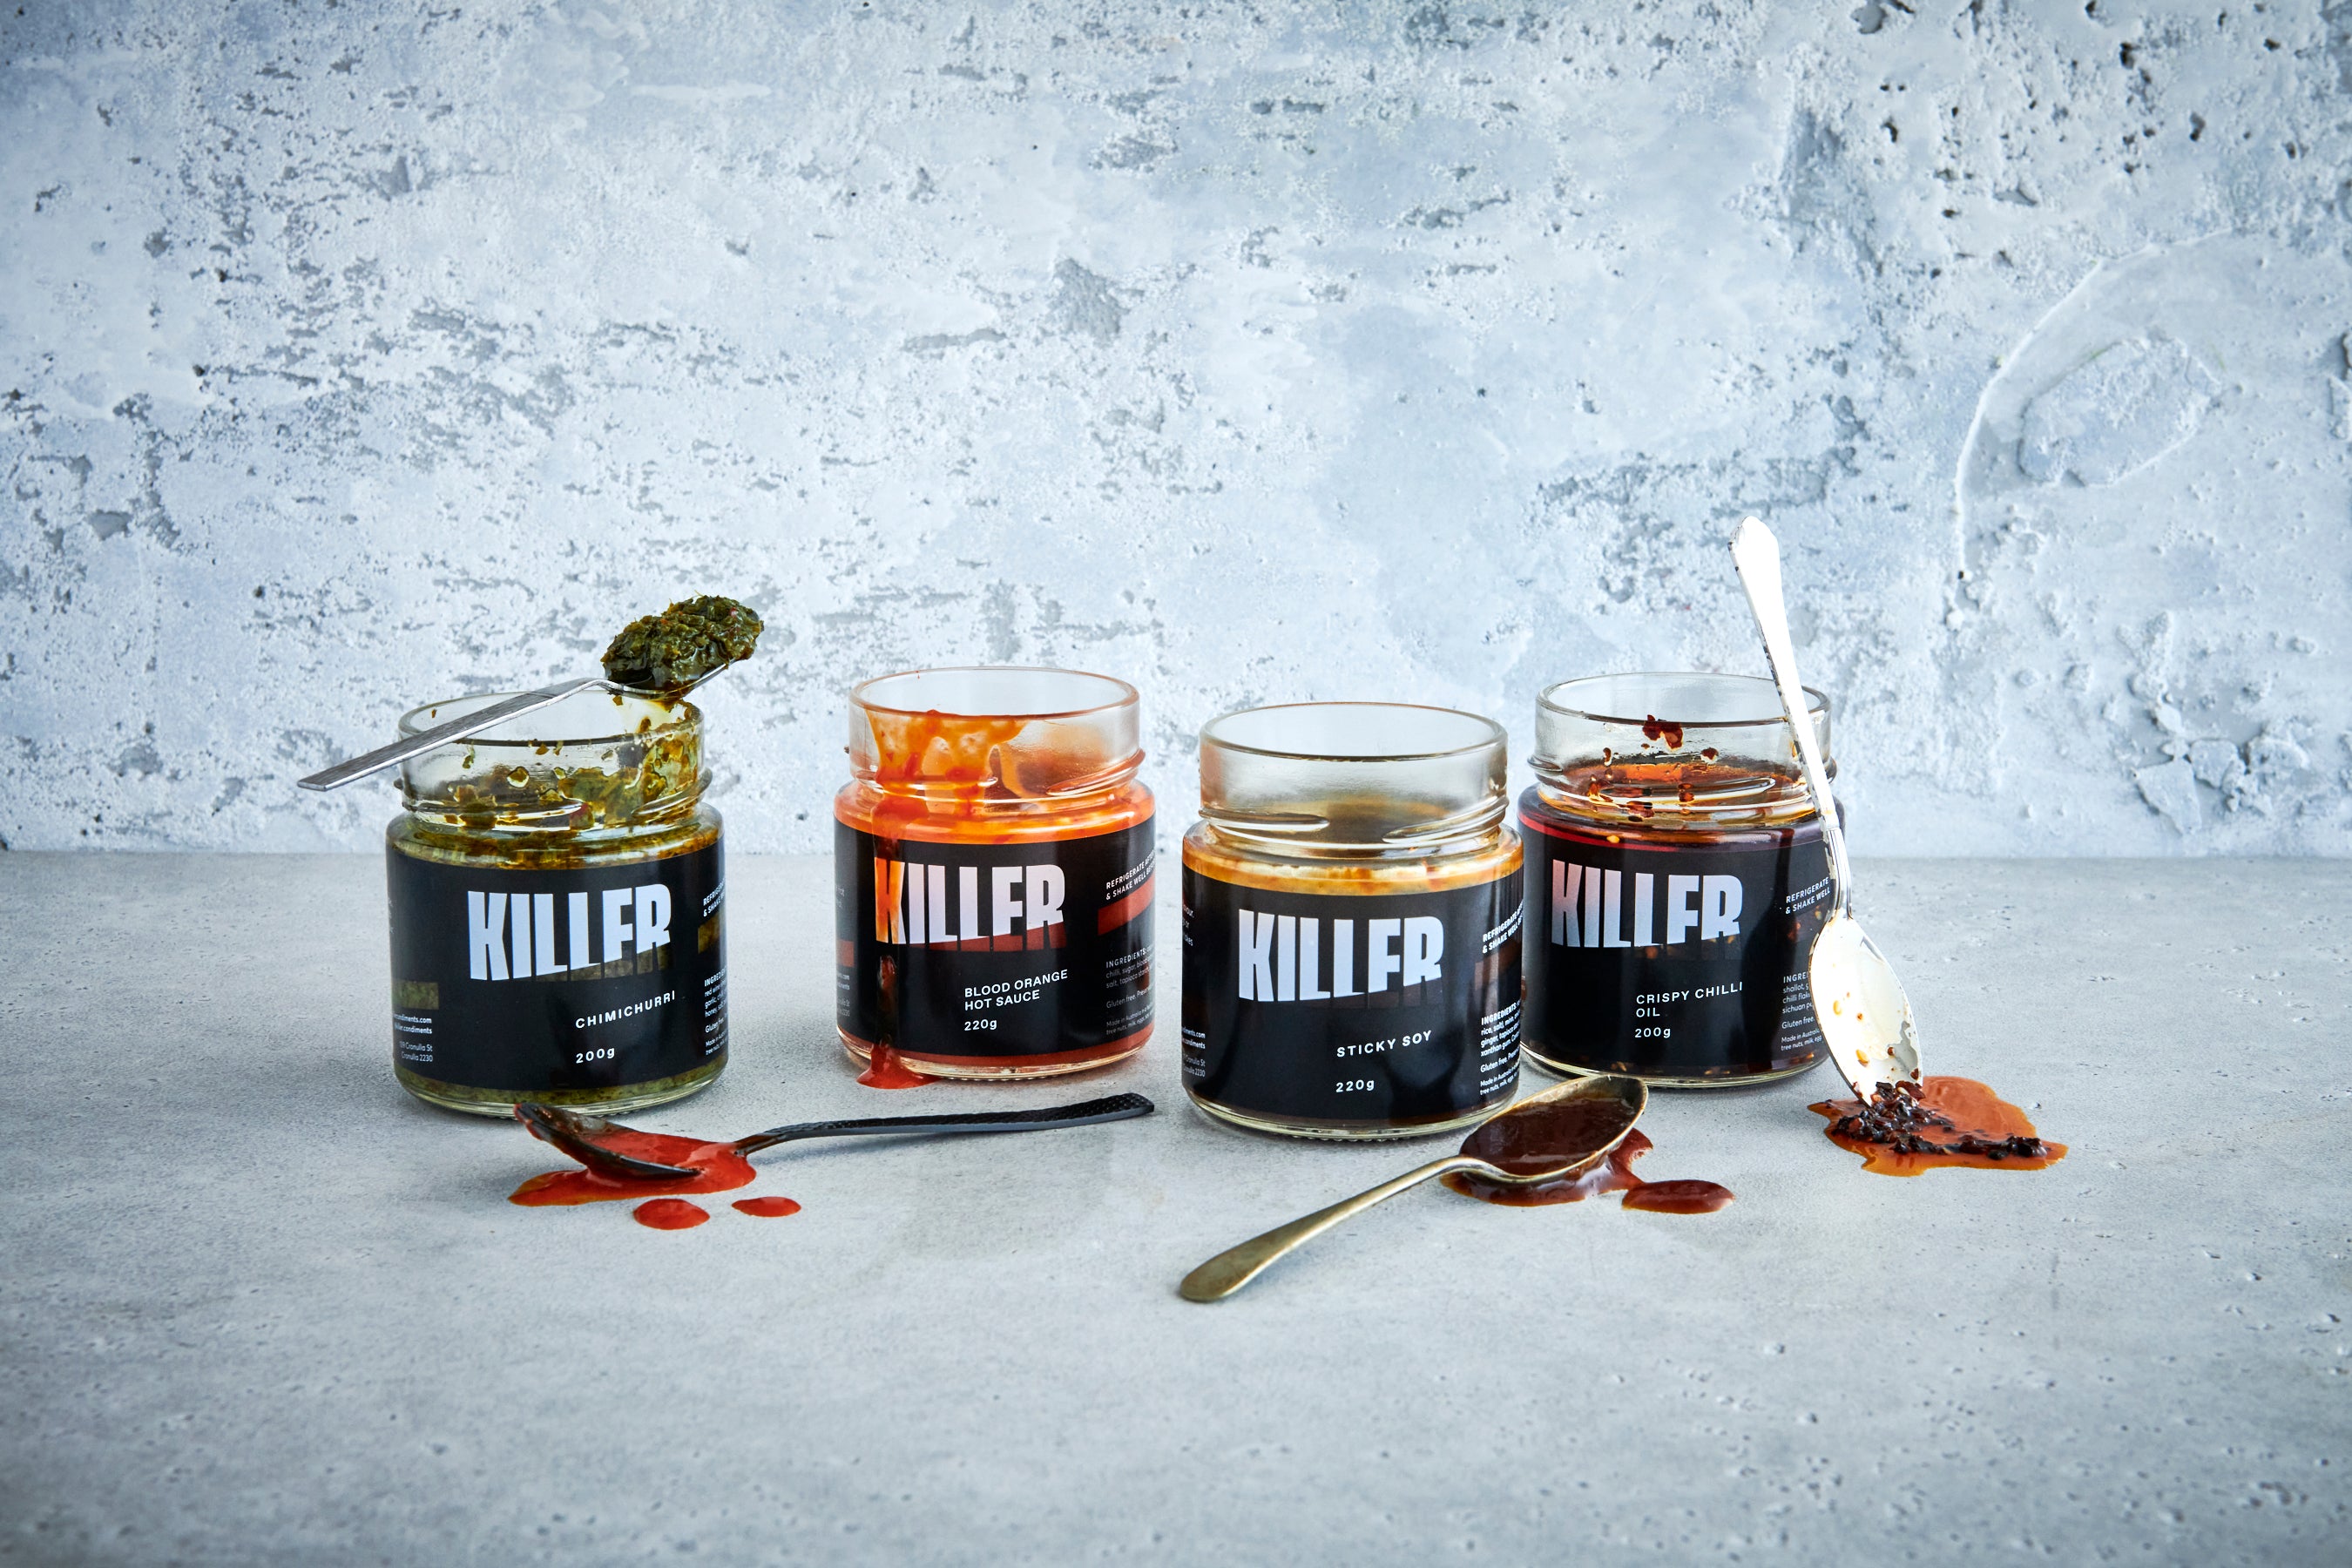 Captivating lifestyle shot of the full range of Killer Condiments artisanal sauces – open jars of Chimichurri, Blood Orange Hot Sauce, Sticky Soy, and Crispy Chilli Oil – tantalizingly dripping down the sides, with spoons lavishly coated in vibrant sauces, set against a minimalist background to accentuate the rich and alluring textures of these gourmet delights.